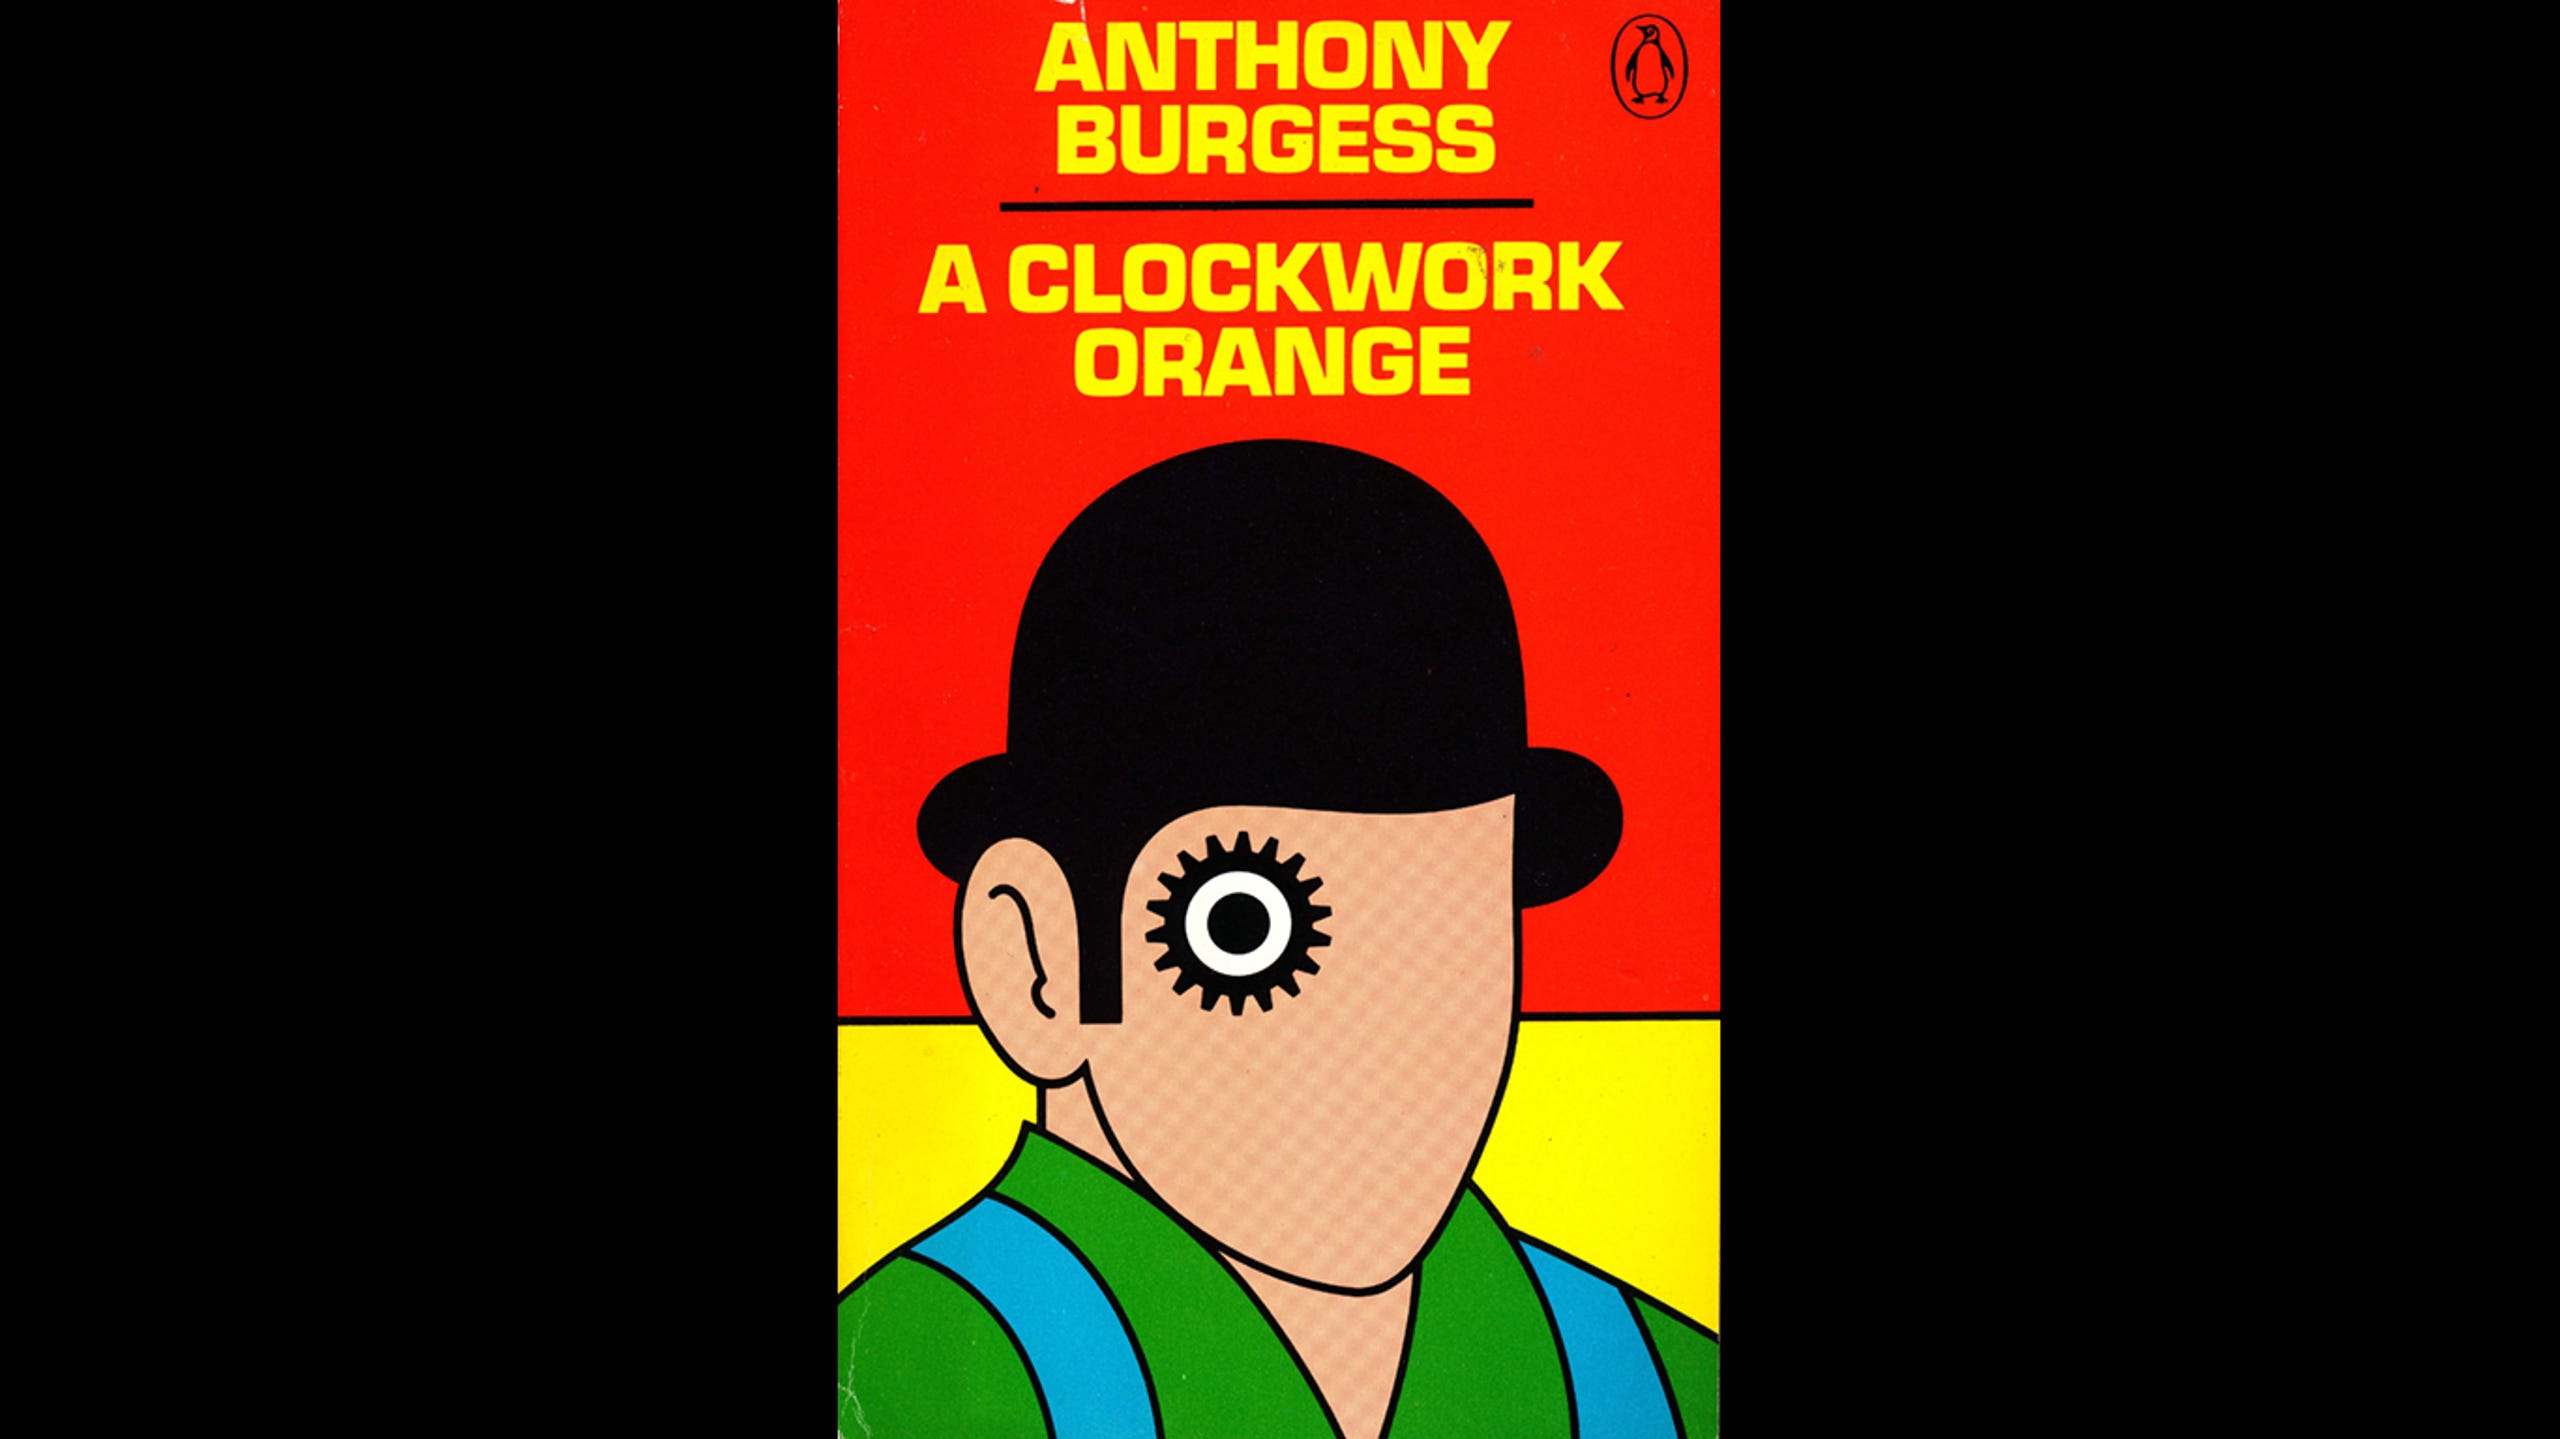 <strong>17. A Clockwork Orange </strong><strong>• Author:</strong> Anthony Burgess <strong>• Originally published in:</strong> 1962 <strong>• </strong>"A Clockwork Orange" is about a 15-year-old boy, Alex, who lives in a futuristic totalitarian society, where youth violence is rampant and ignored. Alex, who is the leader of a small gang that engages in violent acts, undergoes an experimental treatment to change his behavior. After two years in prison, he is released and becomes a political pawn between dissidents and the government. Just like "Huckleberry Finn" or "Lolita," "A Clockwork Orange" addresses controversial and disturbing topics, according to Uruburu. "I think the general belief is that issues of violence against women, slavery, anti-Semitism, homosexuality, etc. need to be confronted and discussed not excised from books and history."